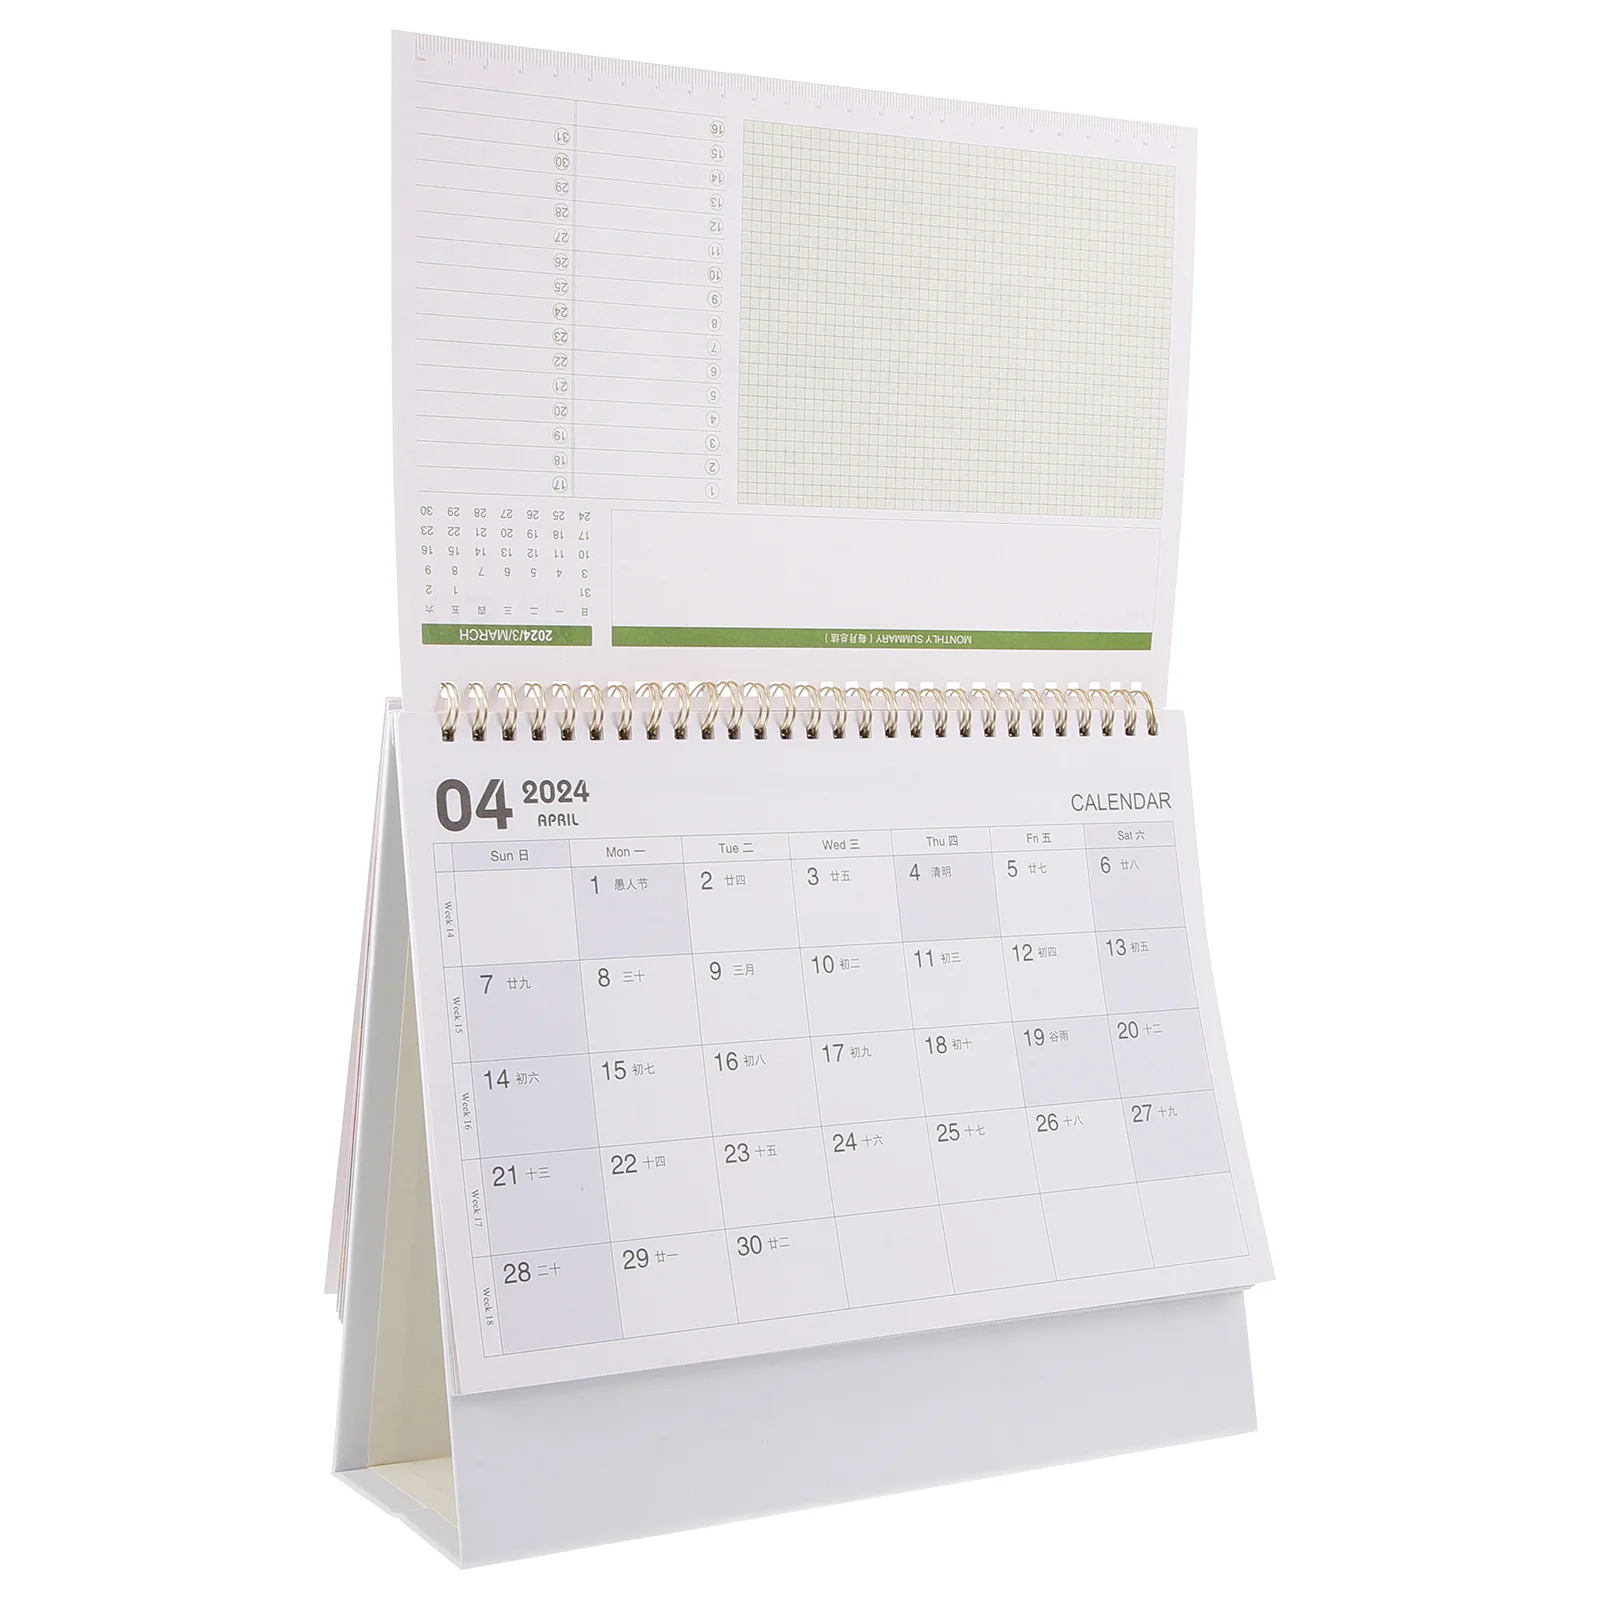 Calendar Office Desk Delicate Mini Year Calendars Daily Use Household Standing Ornaments